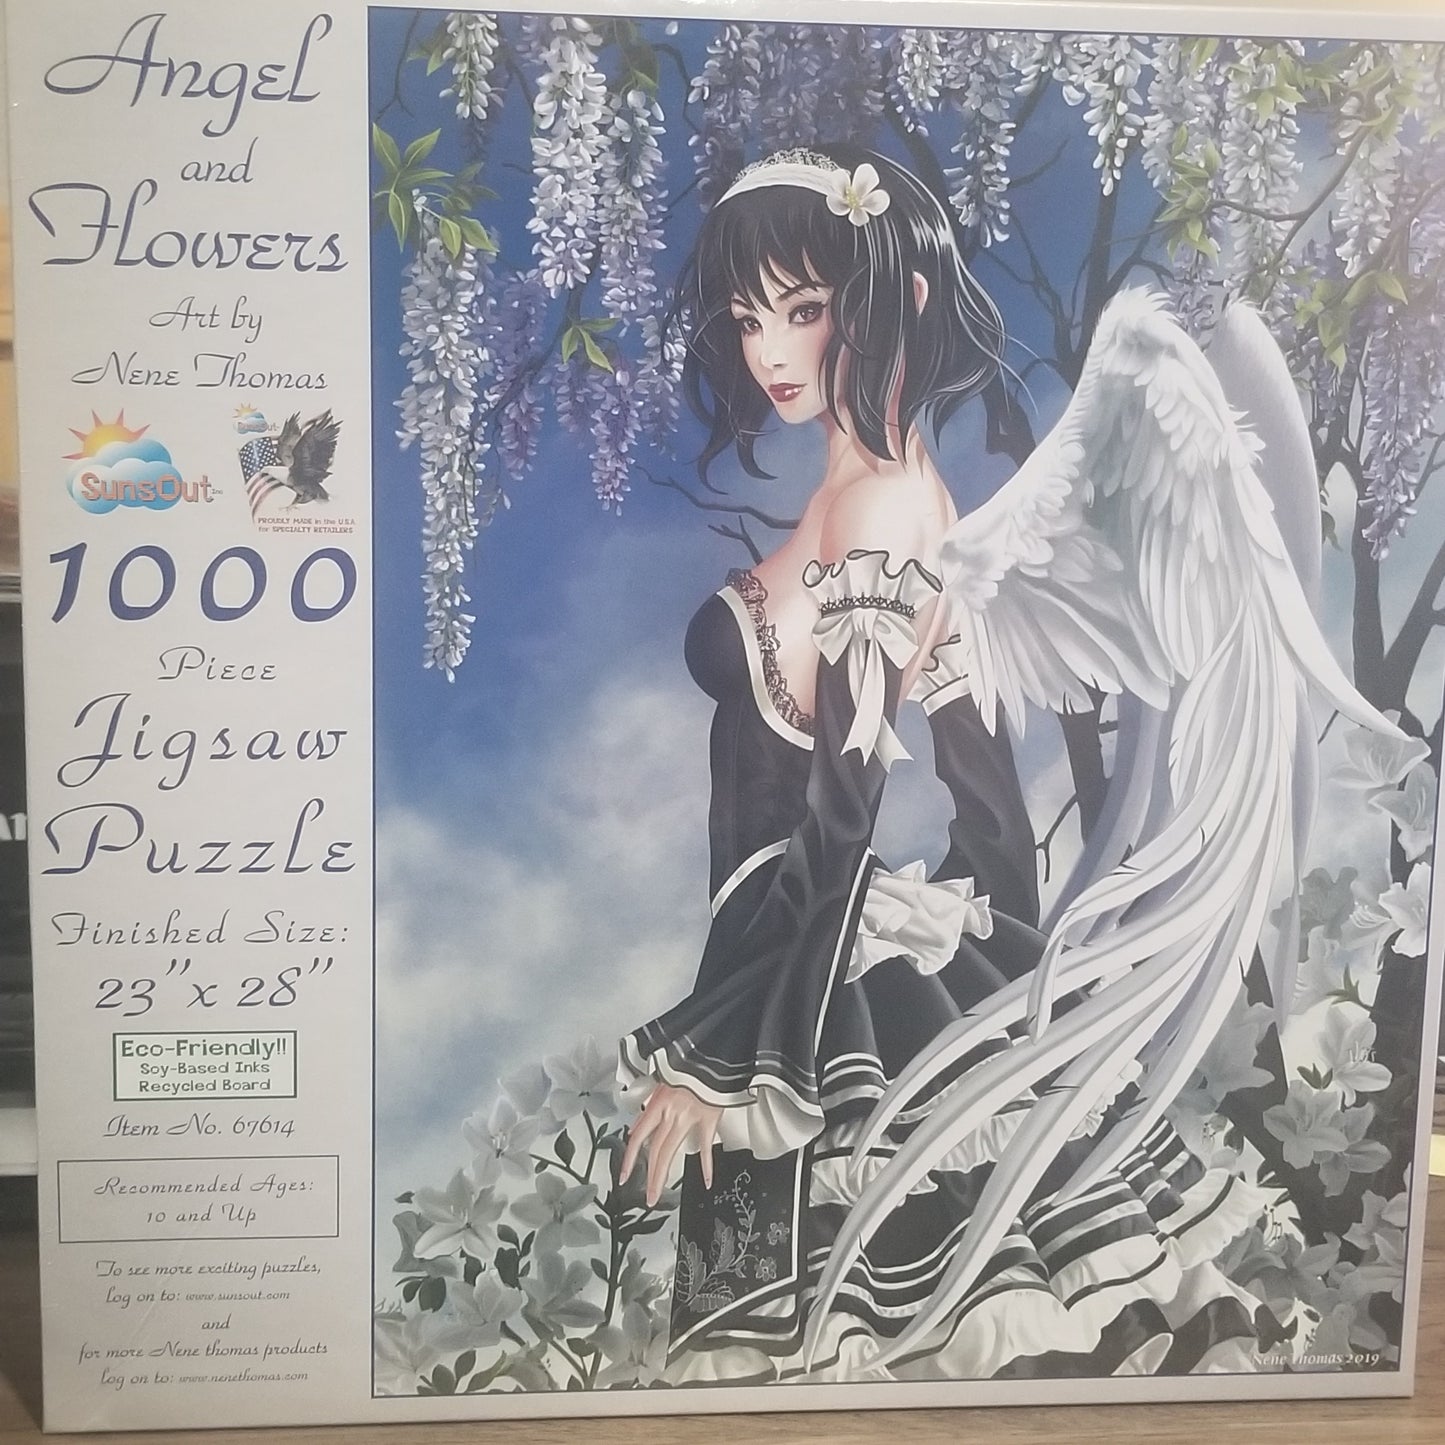 Angel and Flowers by Nene Thomas, 1000 Piece Puzzle